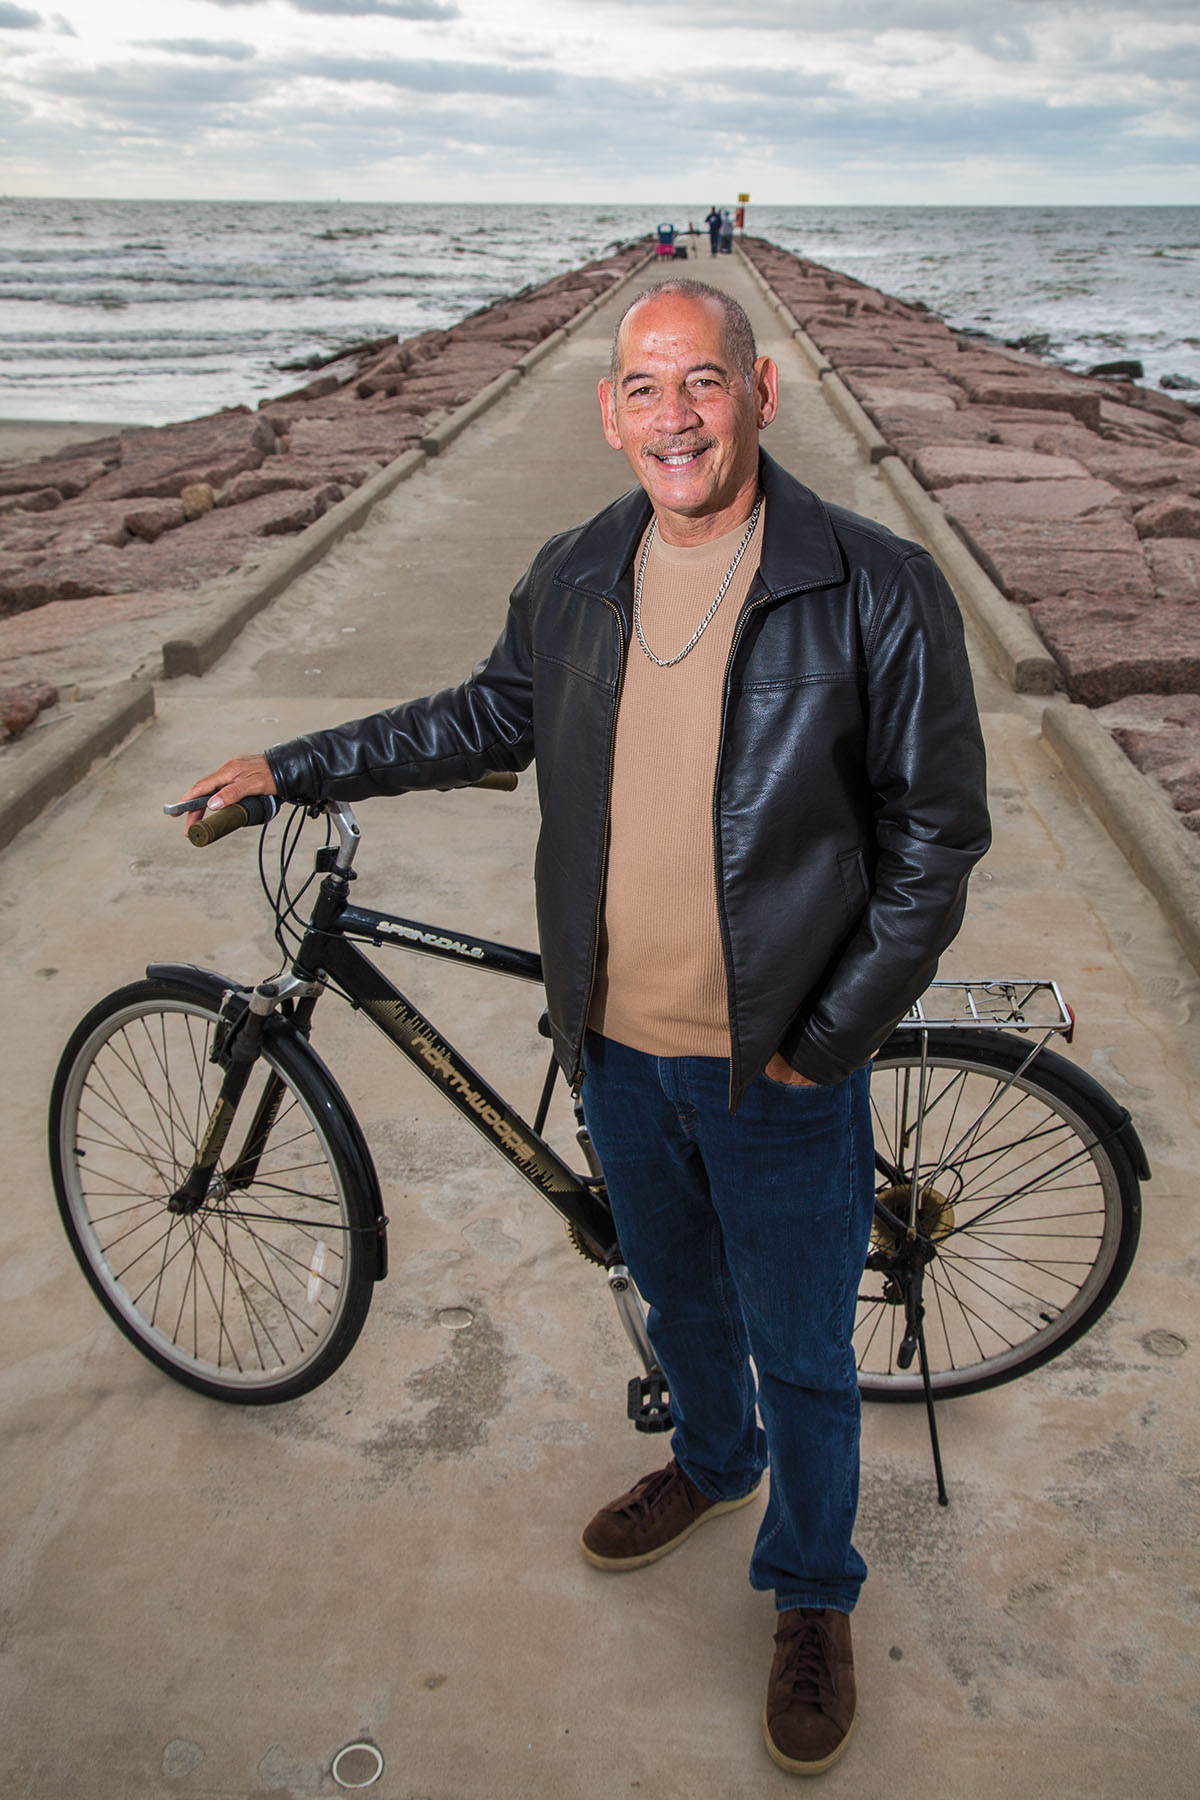 A man in a leather jacket and tan t-shirt stands on a pier holding a bicycle